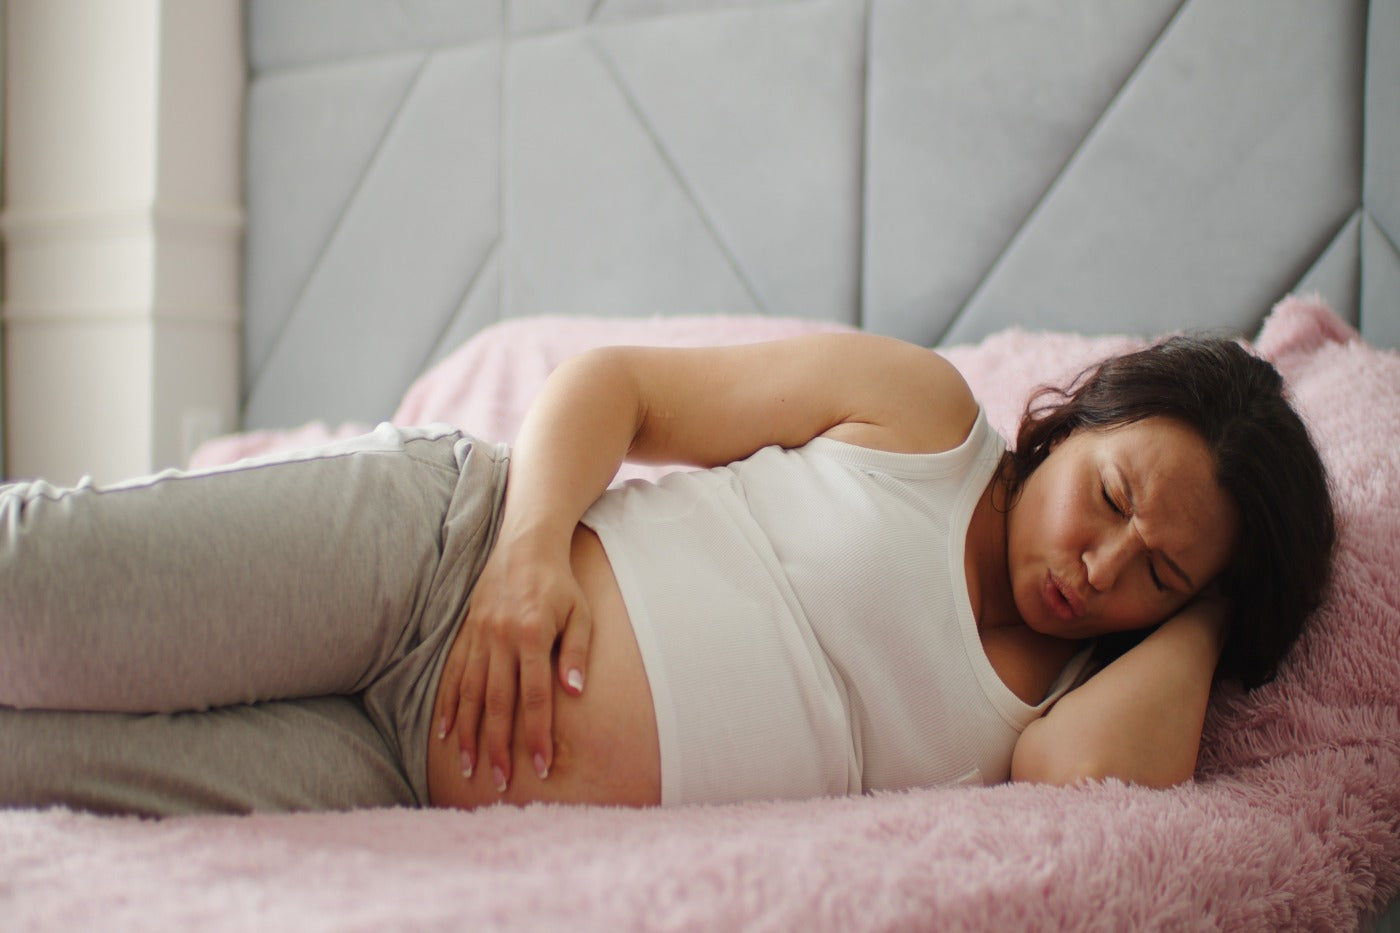 Round Ligament Pain In Pregnancy: What is It?